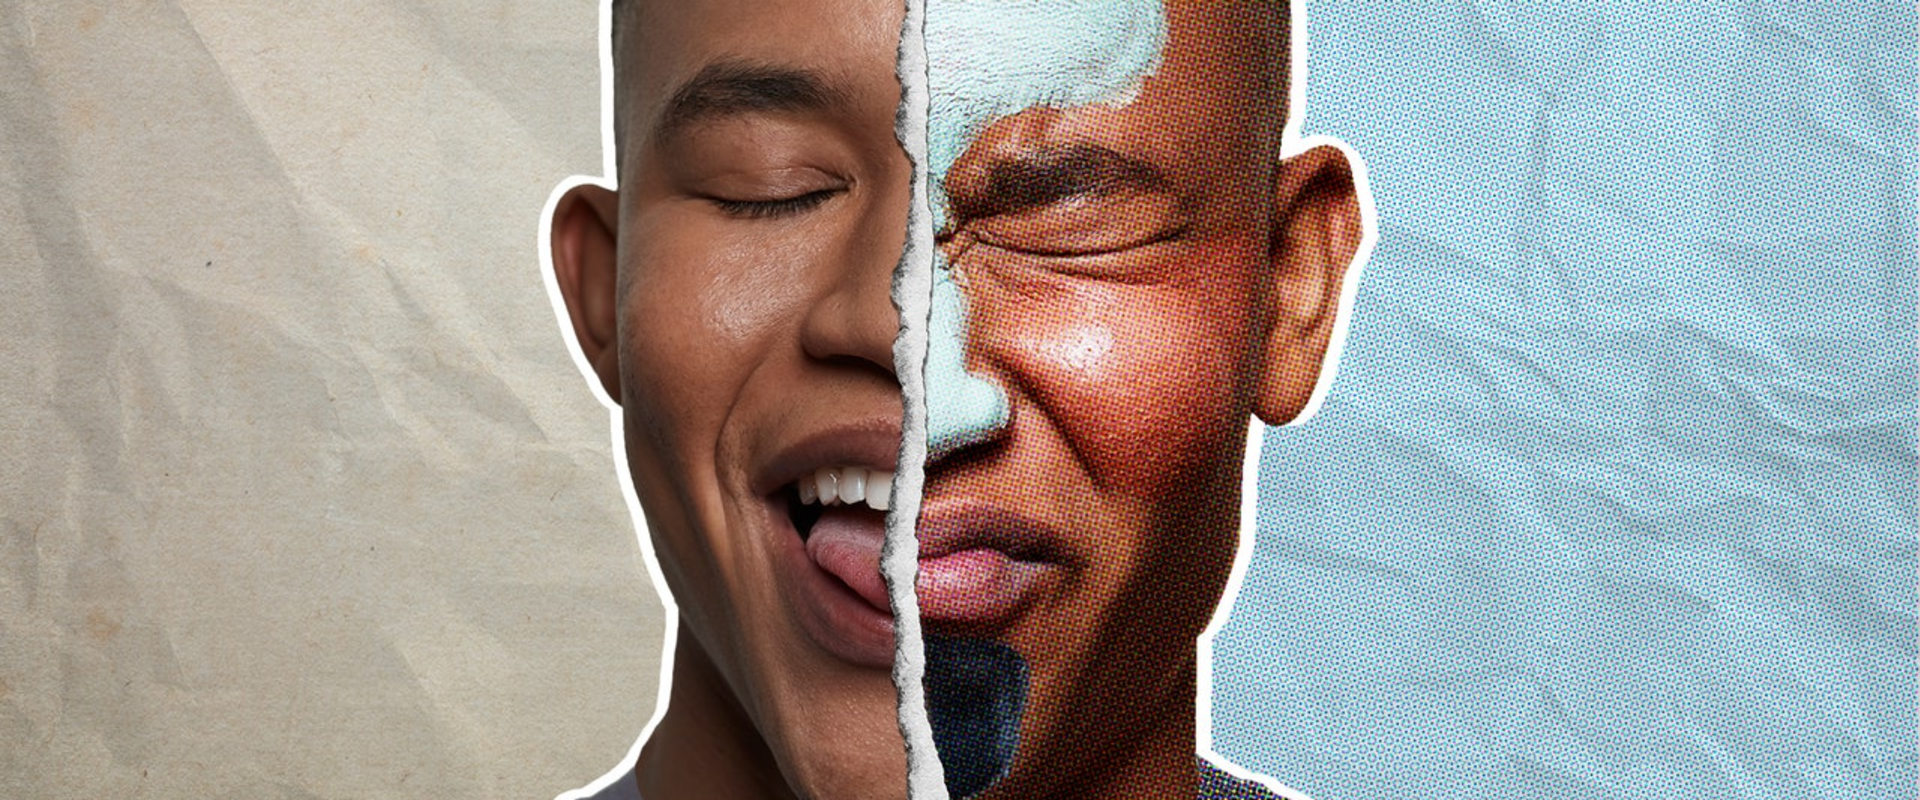 The Best Men's Skincare for Different Skin Types